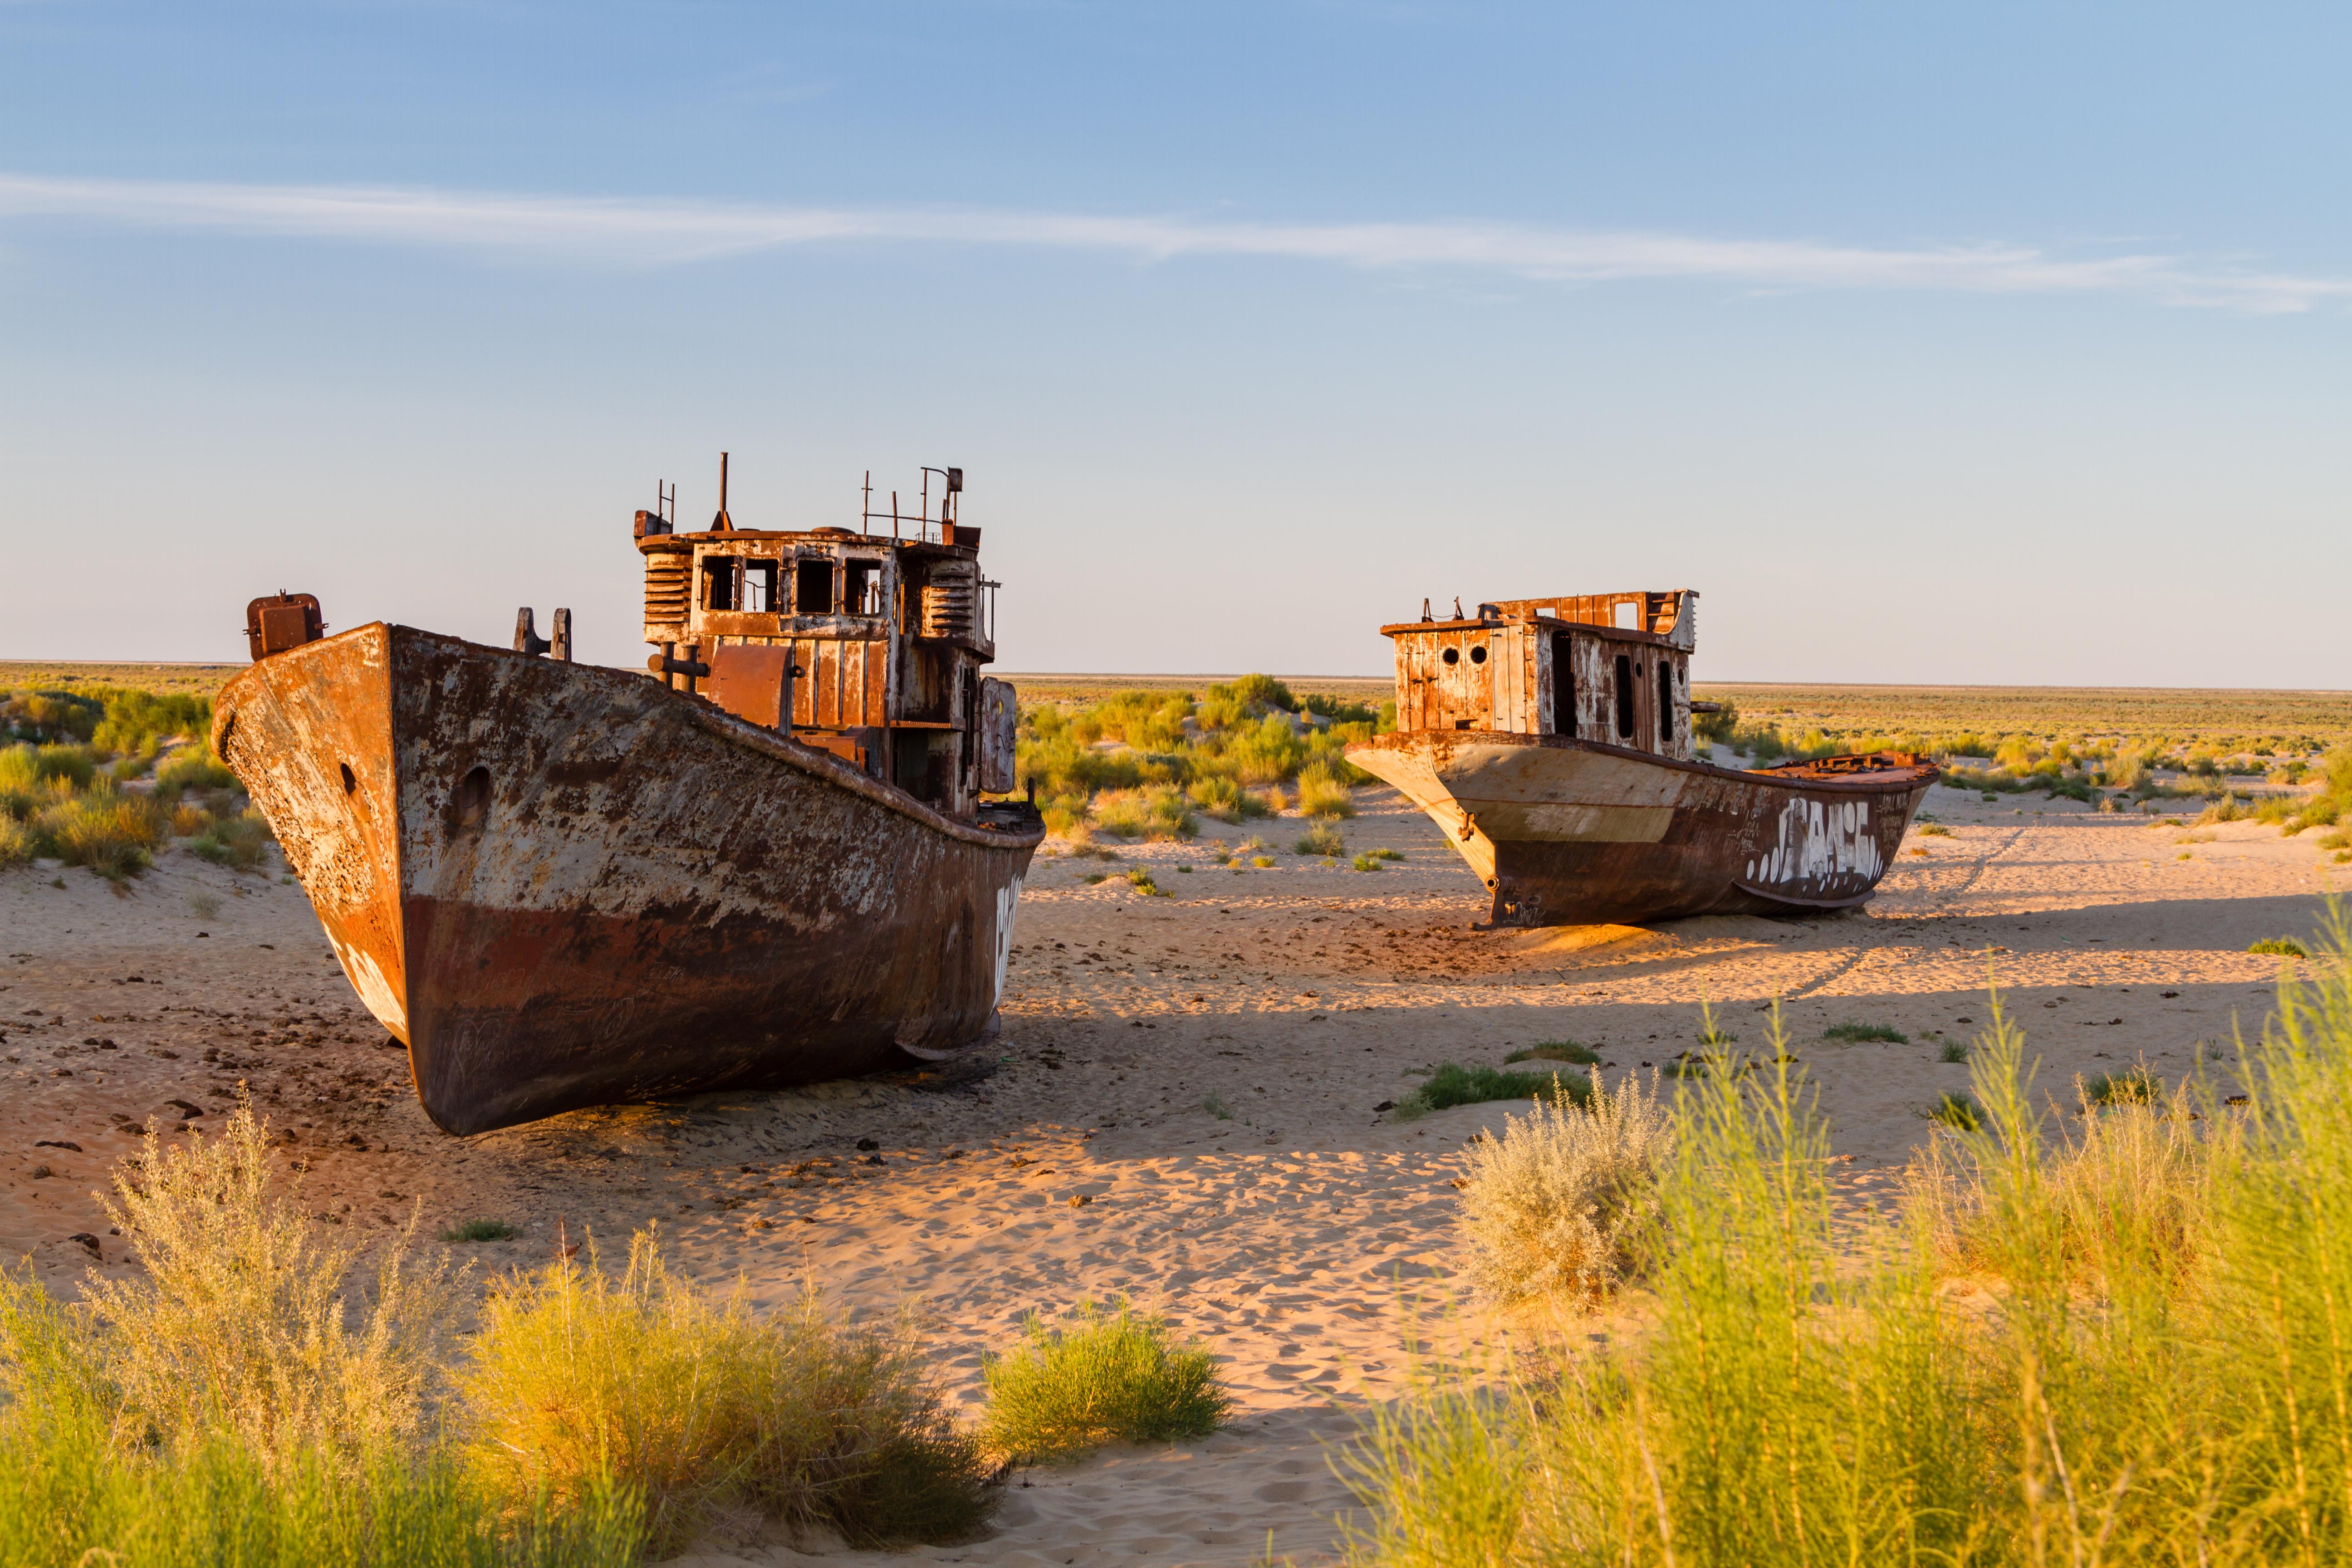 Boats abandoned at the port of Muynak